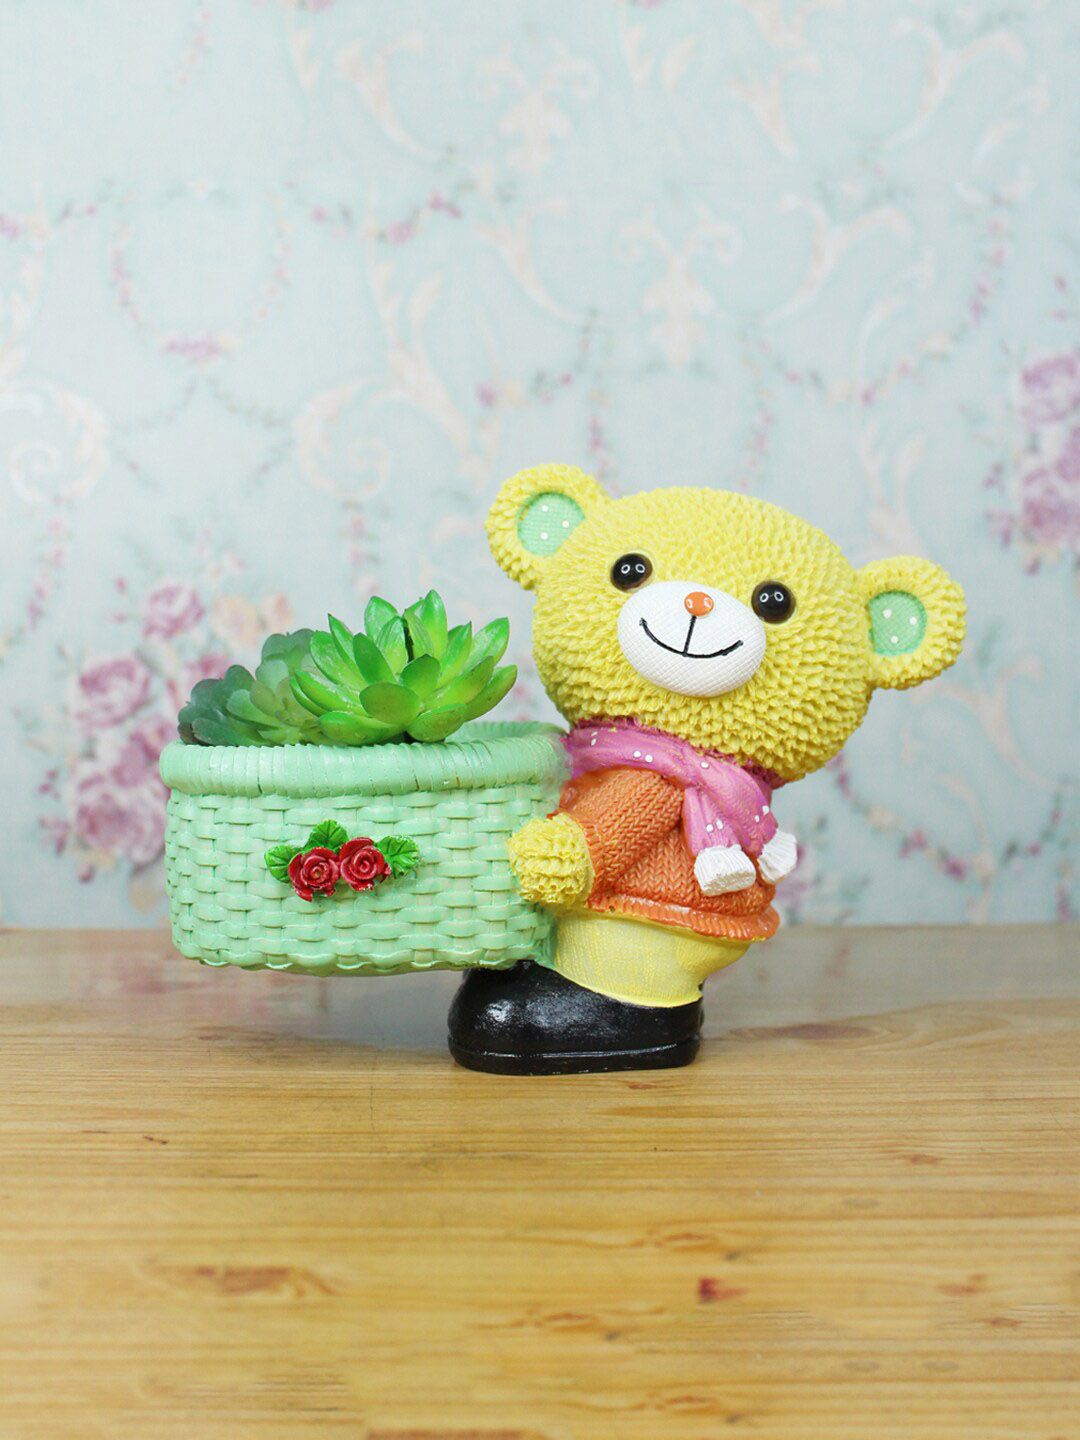 Wonderland Yellow & Green Teddy Shaped Flower Pot Planters Price in India